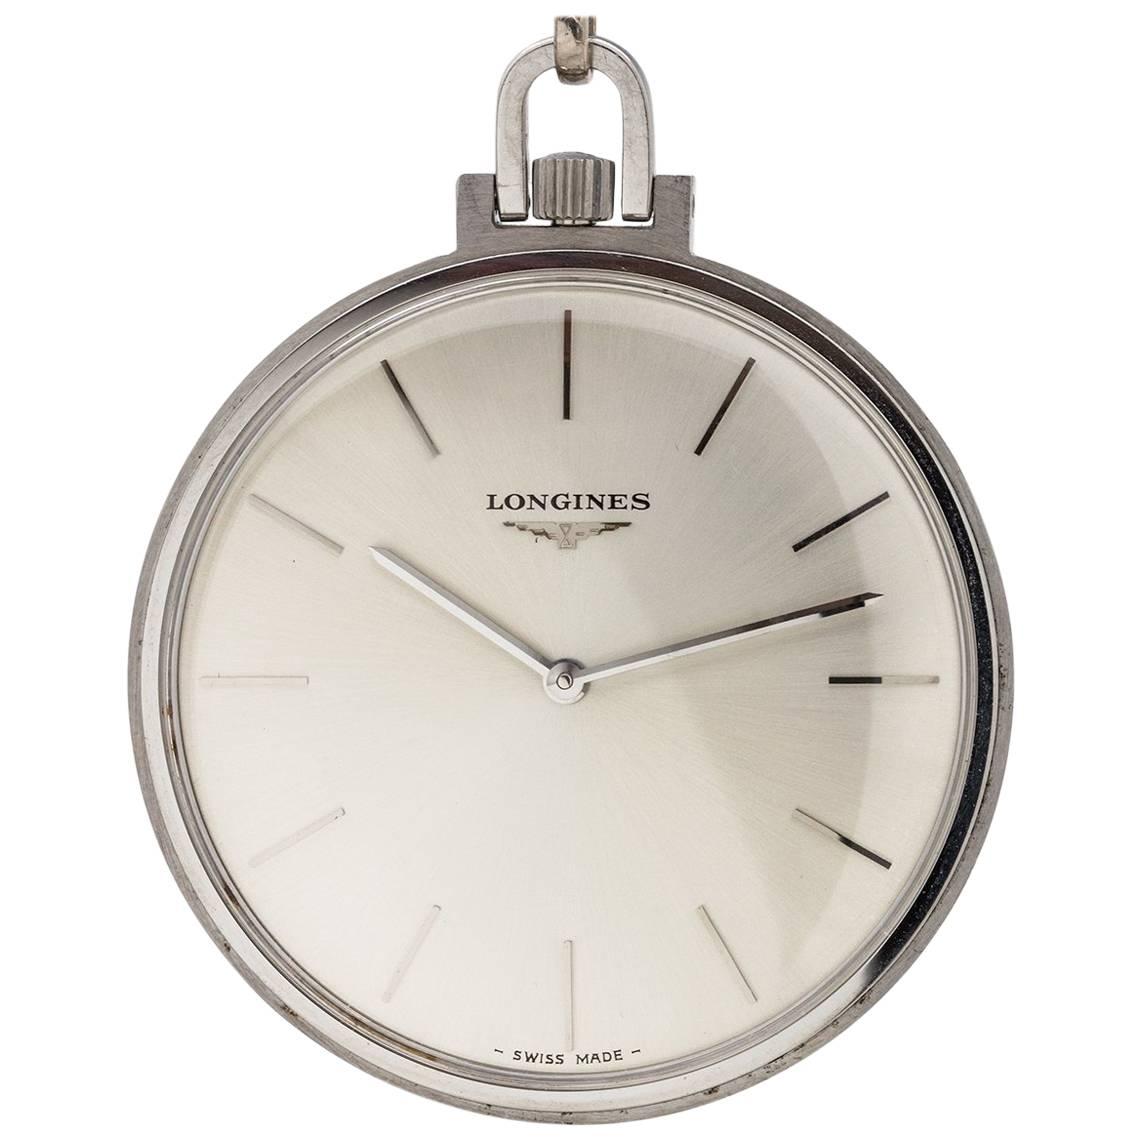 Longines Stainless Steel Dress Manual Wind Pocket Watch, circa 1960s For Sale